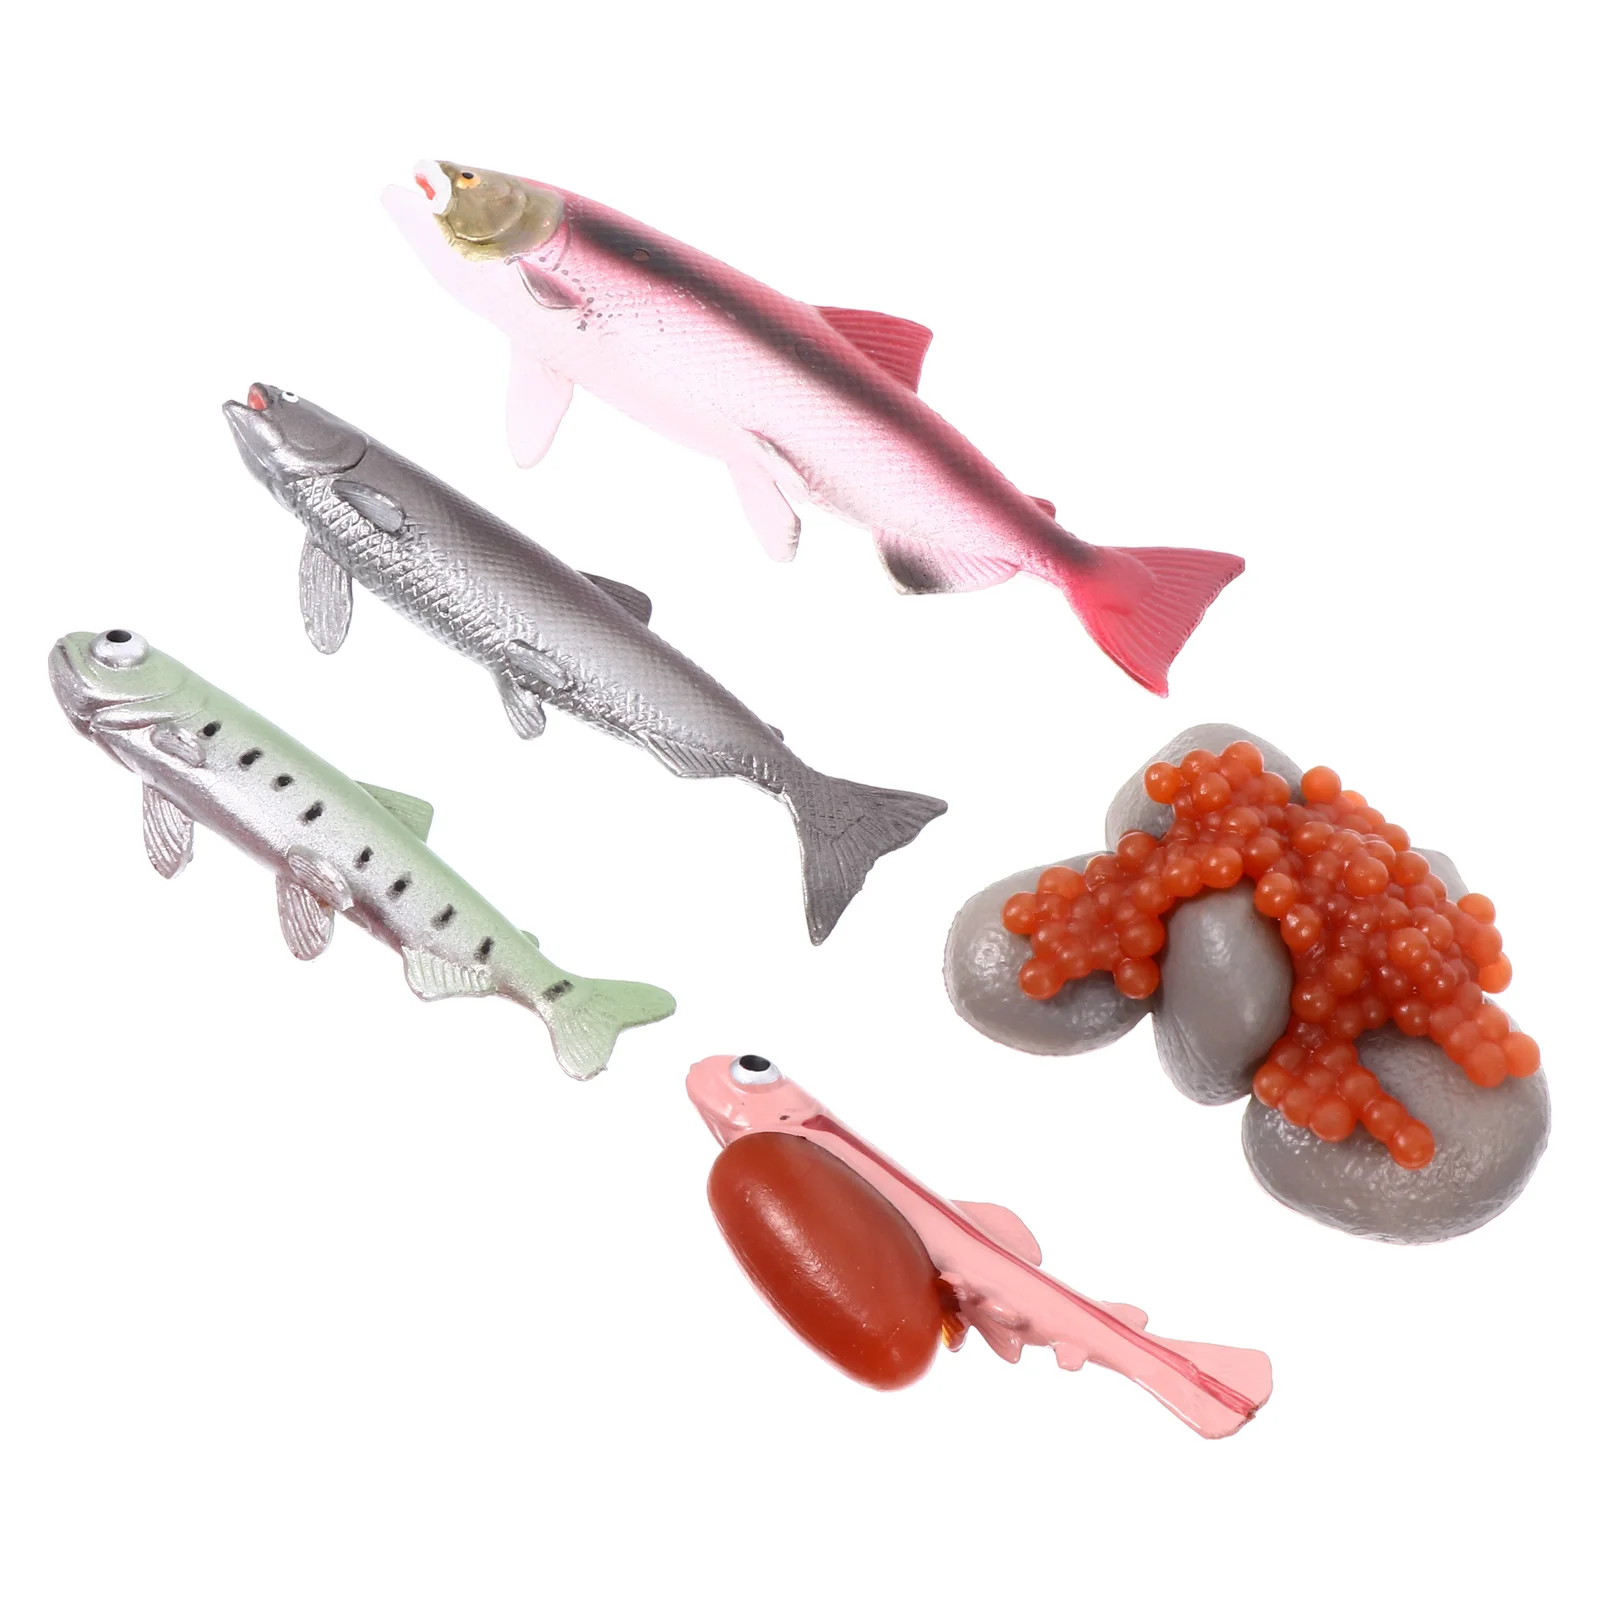 

Mini Toys Kids Growth Cycle Simulation Ocean Creature Model Fake Ornament Decorate Children Artificial Sea Animal Student